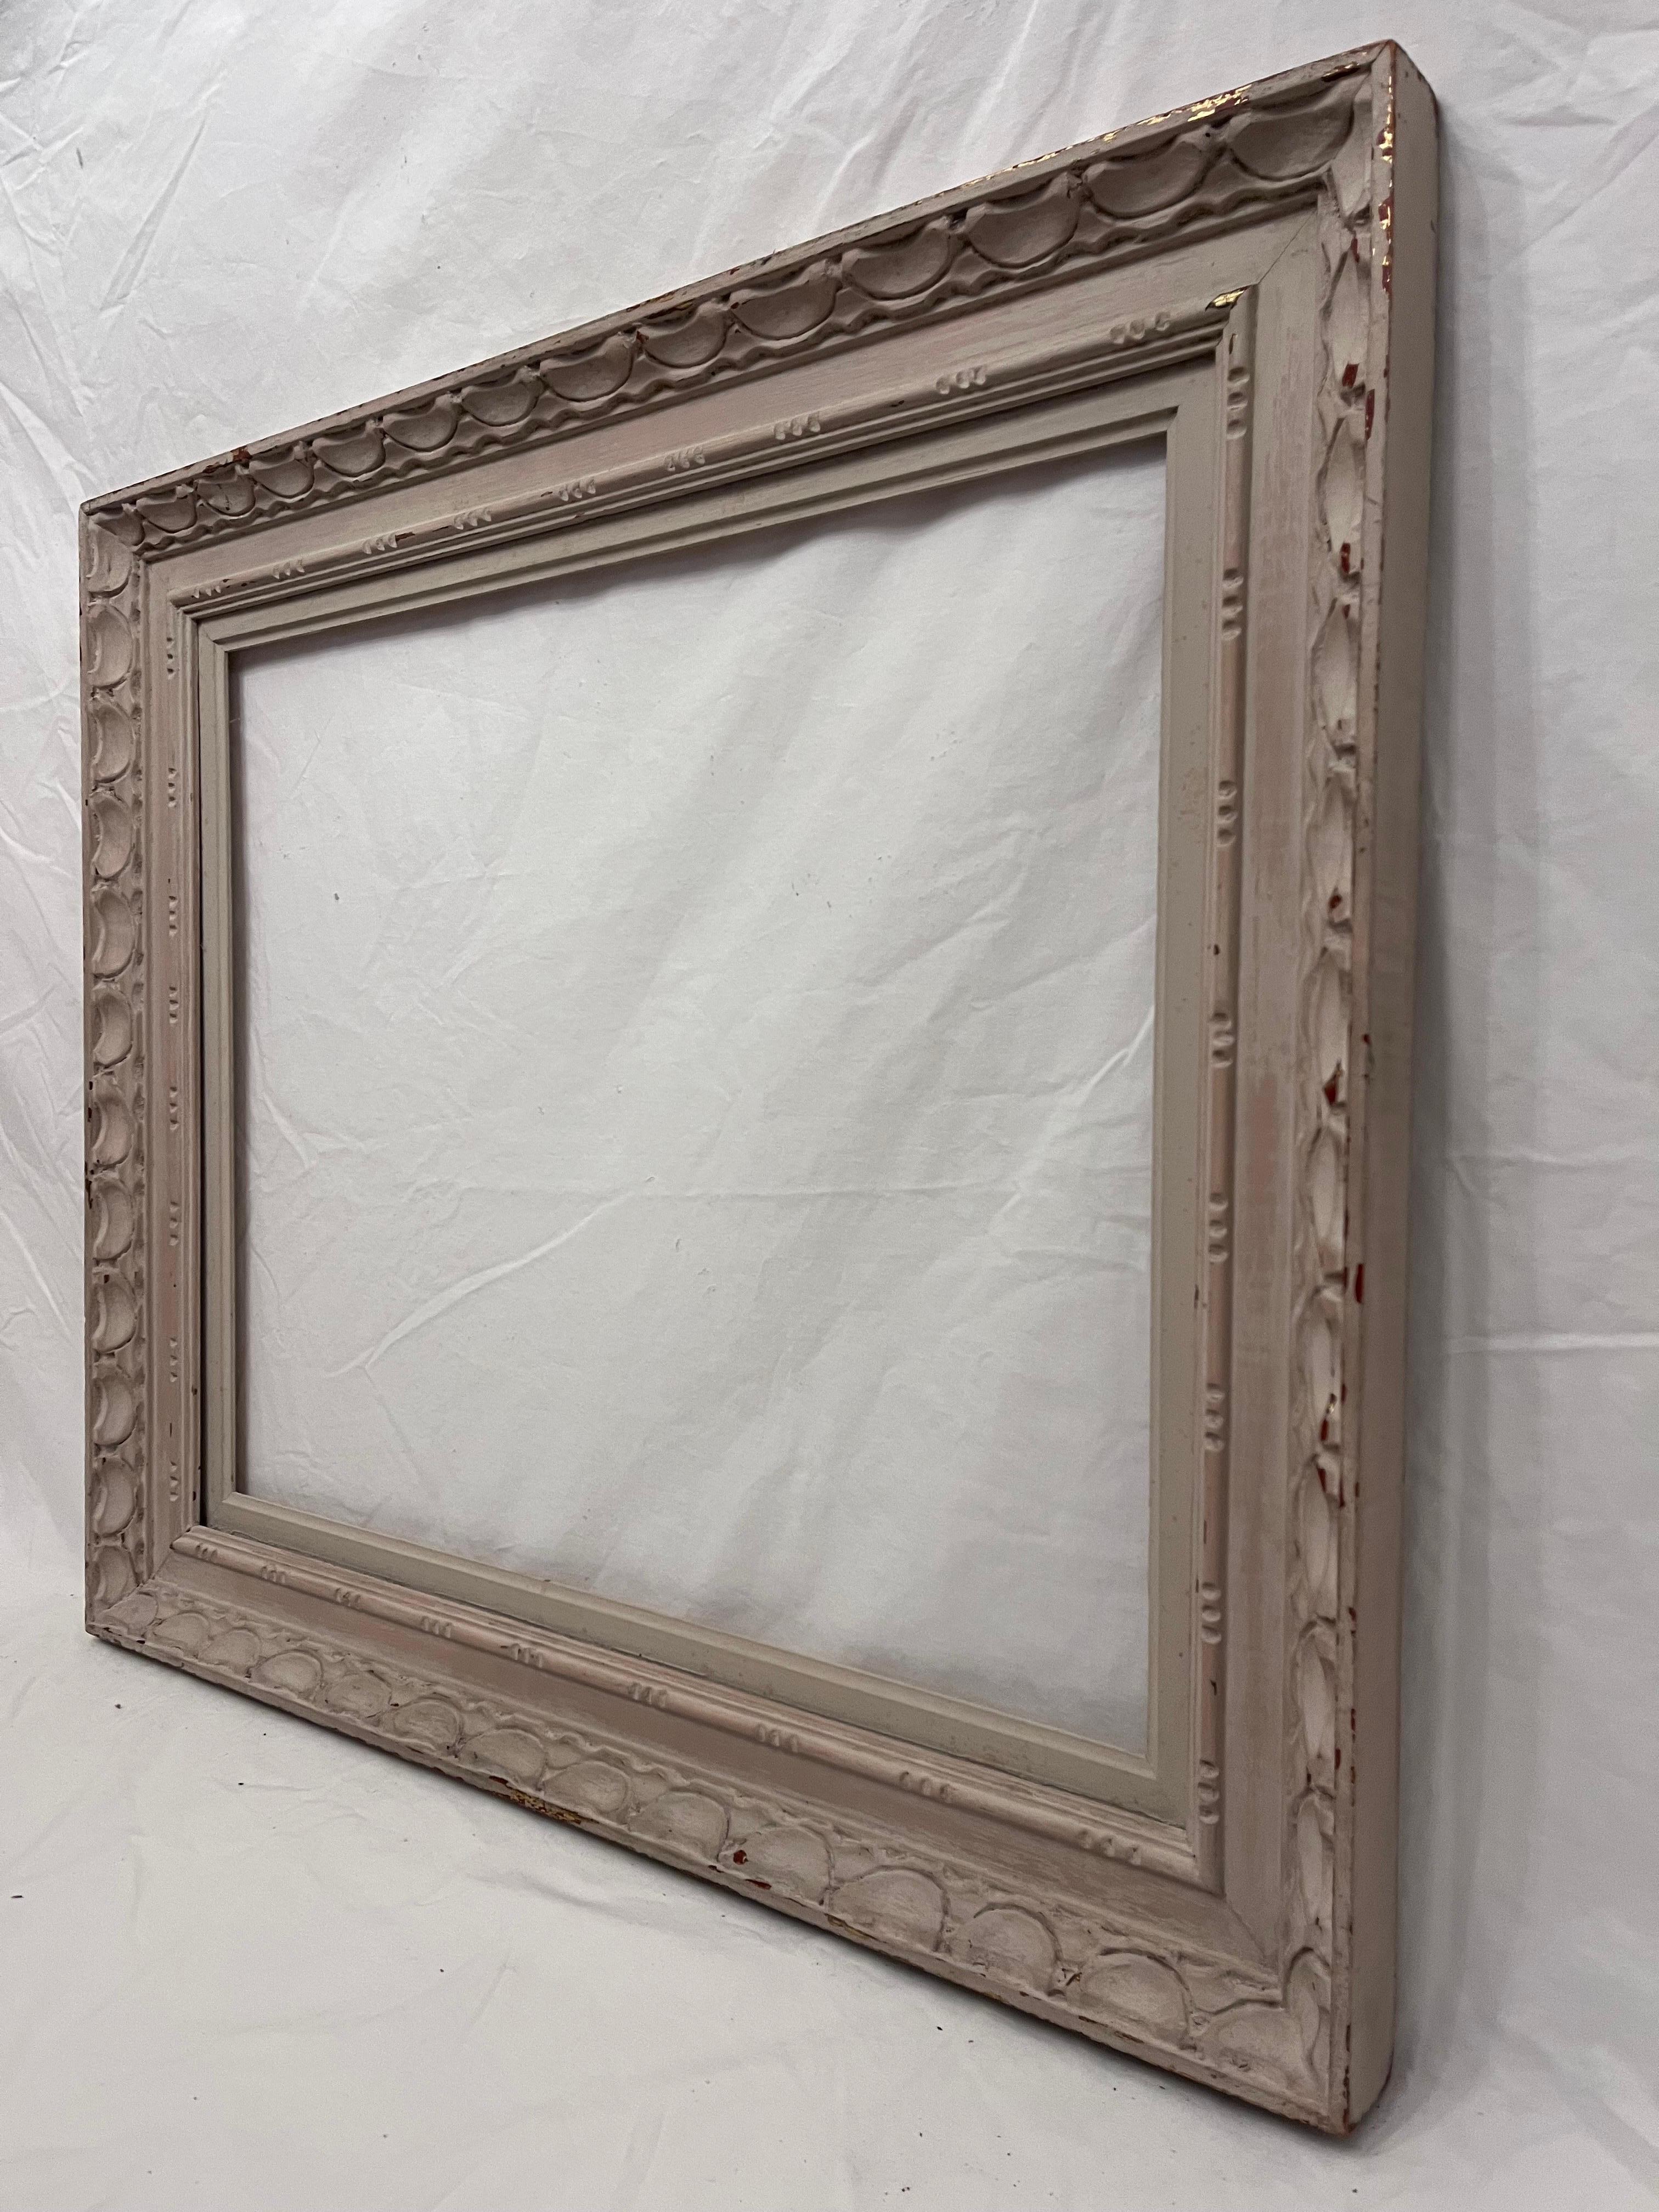 A beautiful and vintage mid 20th century circa 1950's American Modernist style white painted finish picture frame. The rabbet size (size that holds the art) is 24.25